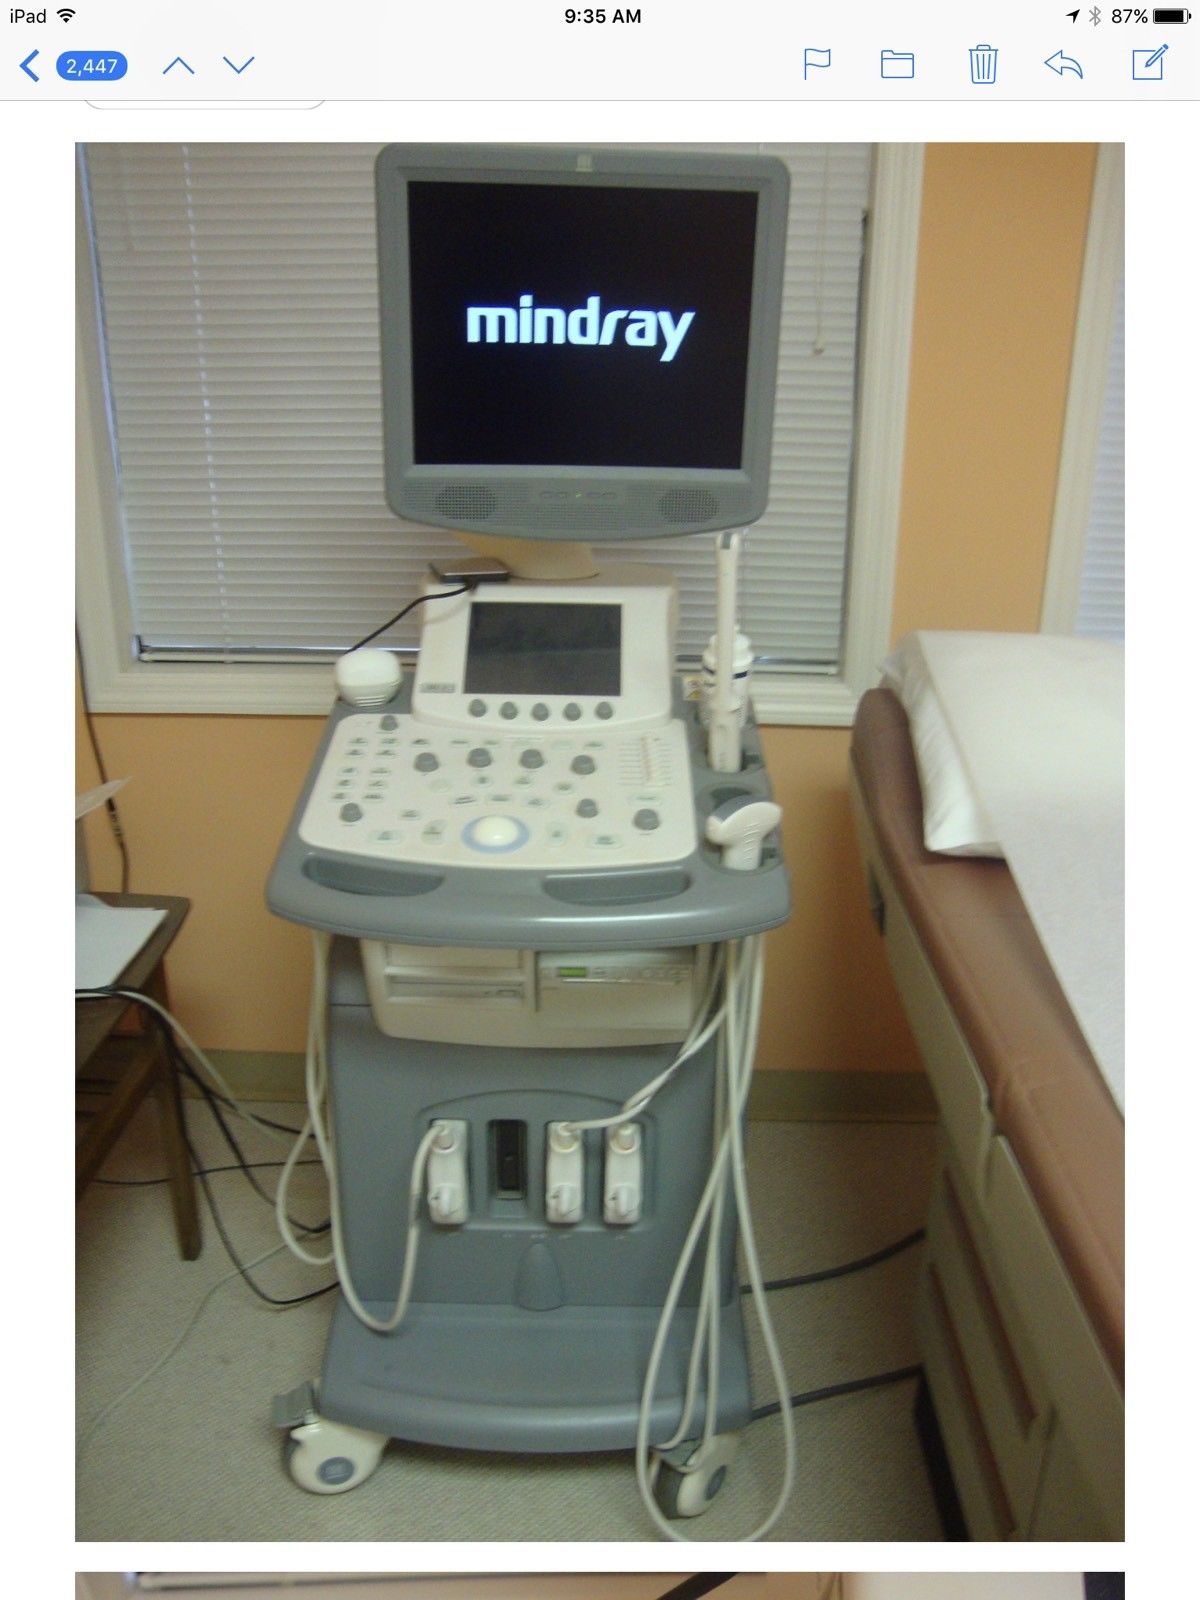 Mindray Ultrasound DC 7 DIAGNOSTIC ULTRASOUND MACHINES FOR SALE